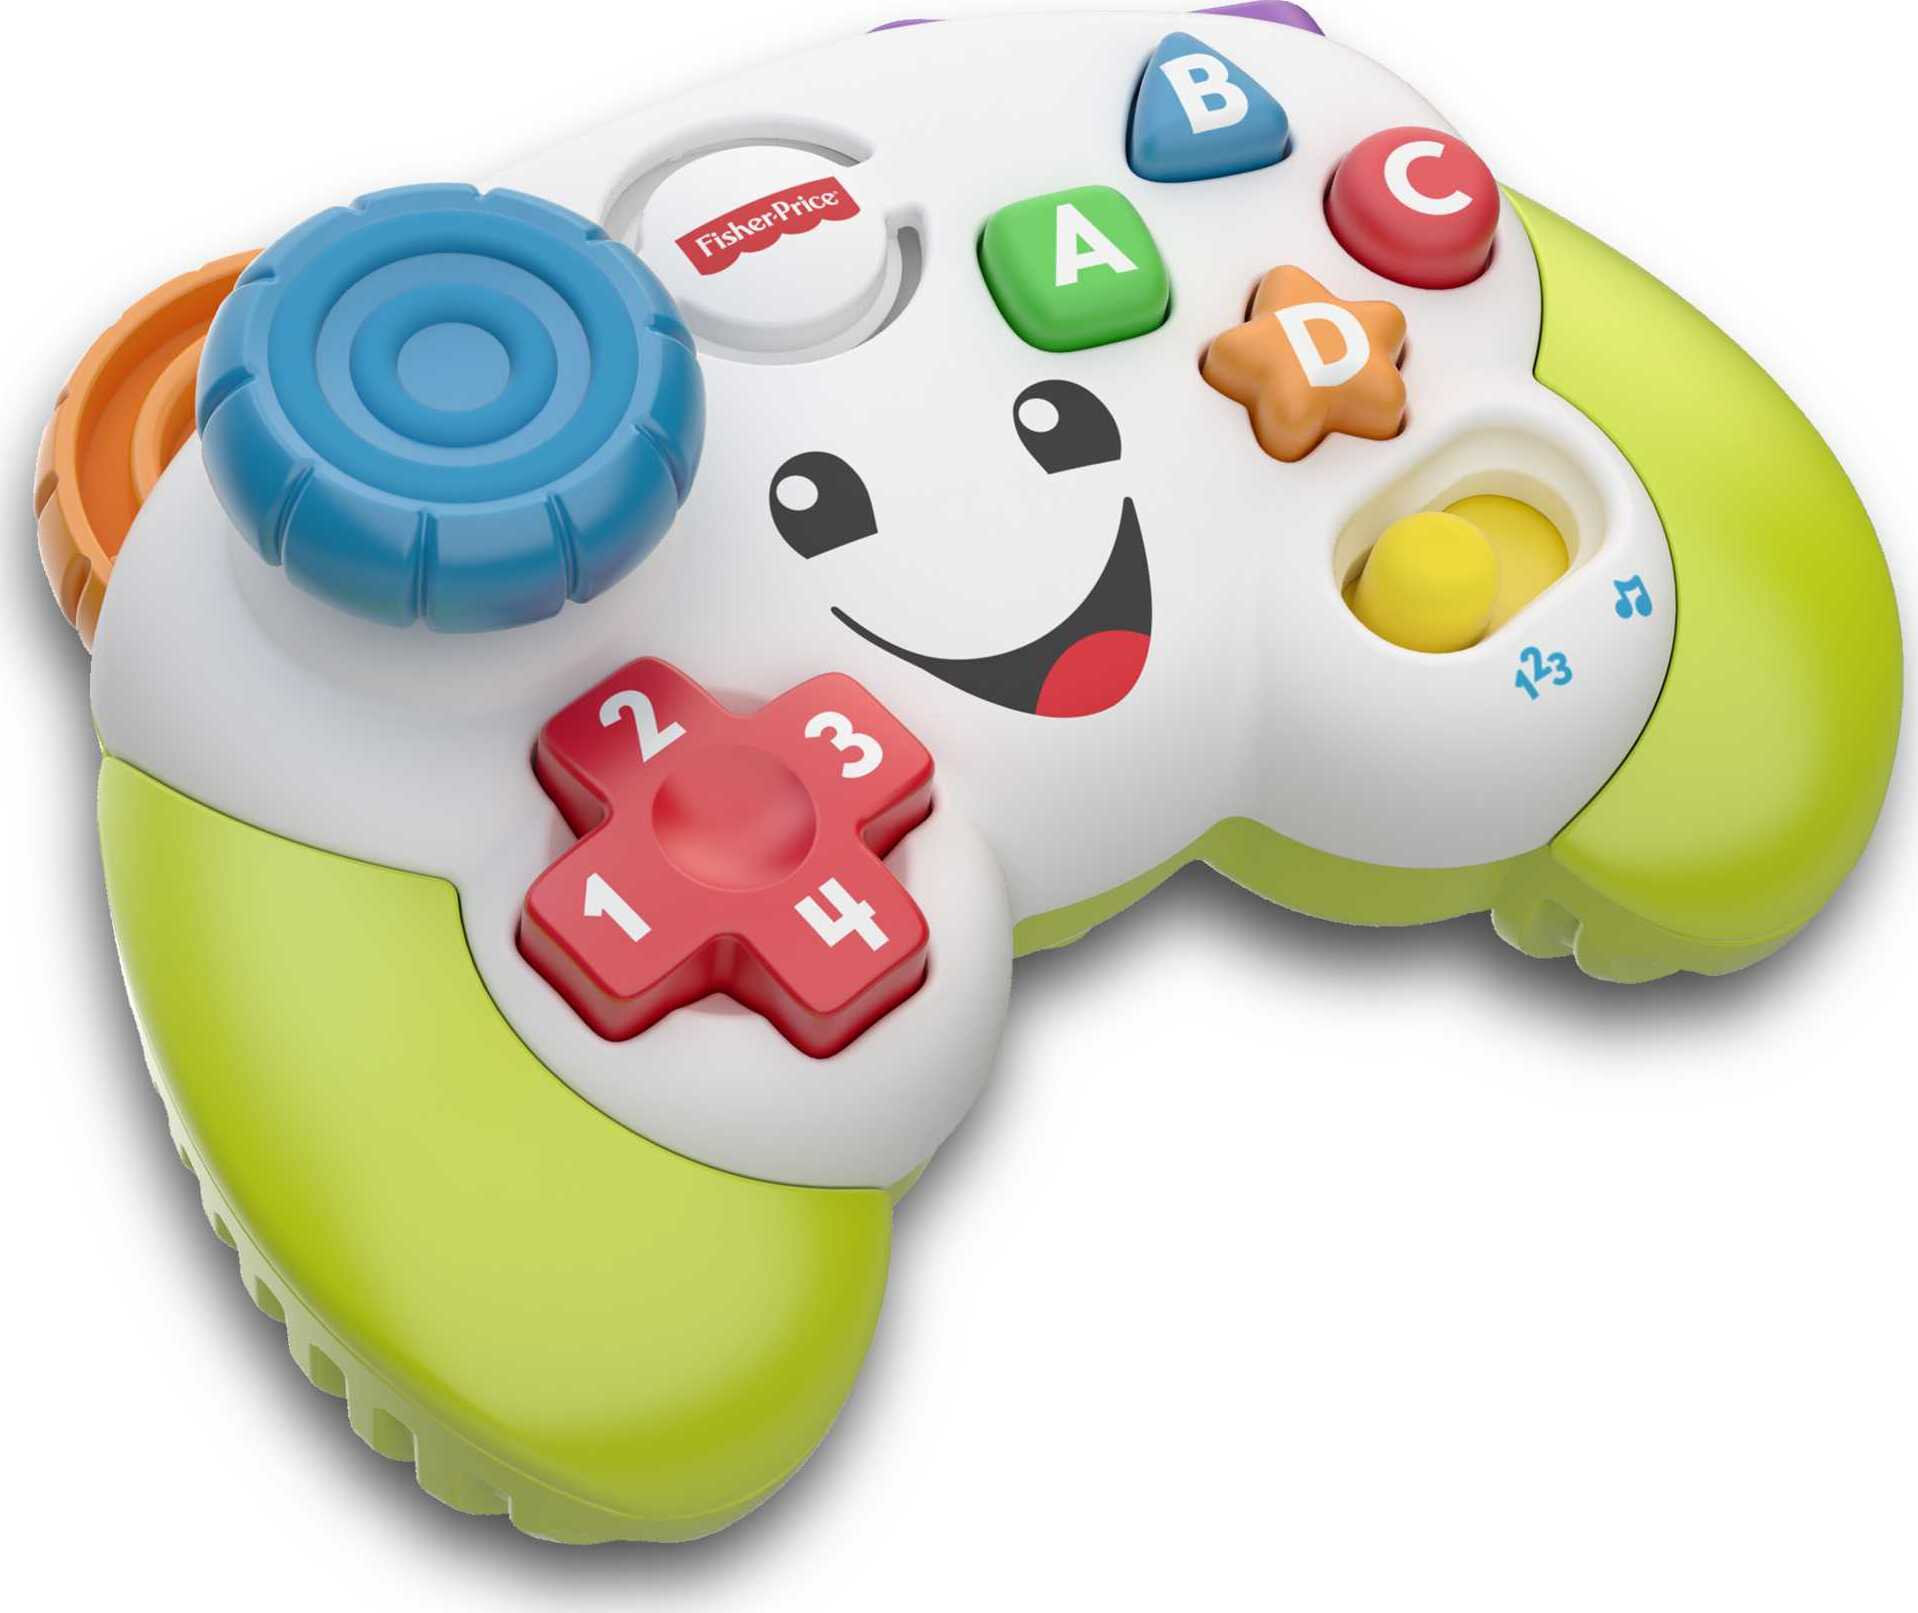 Fisher-Price Laugh & Learn Game & Learn Controller, Ages 6 to 36 Months - image 1 of 8